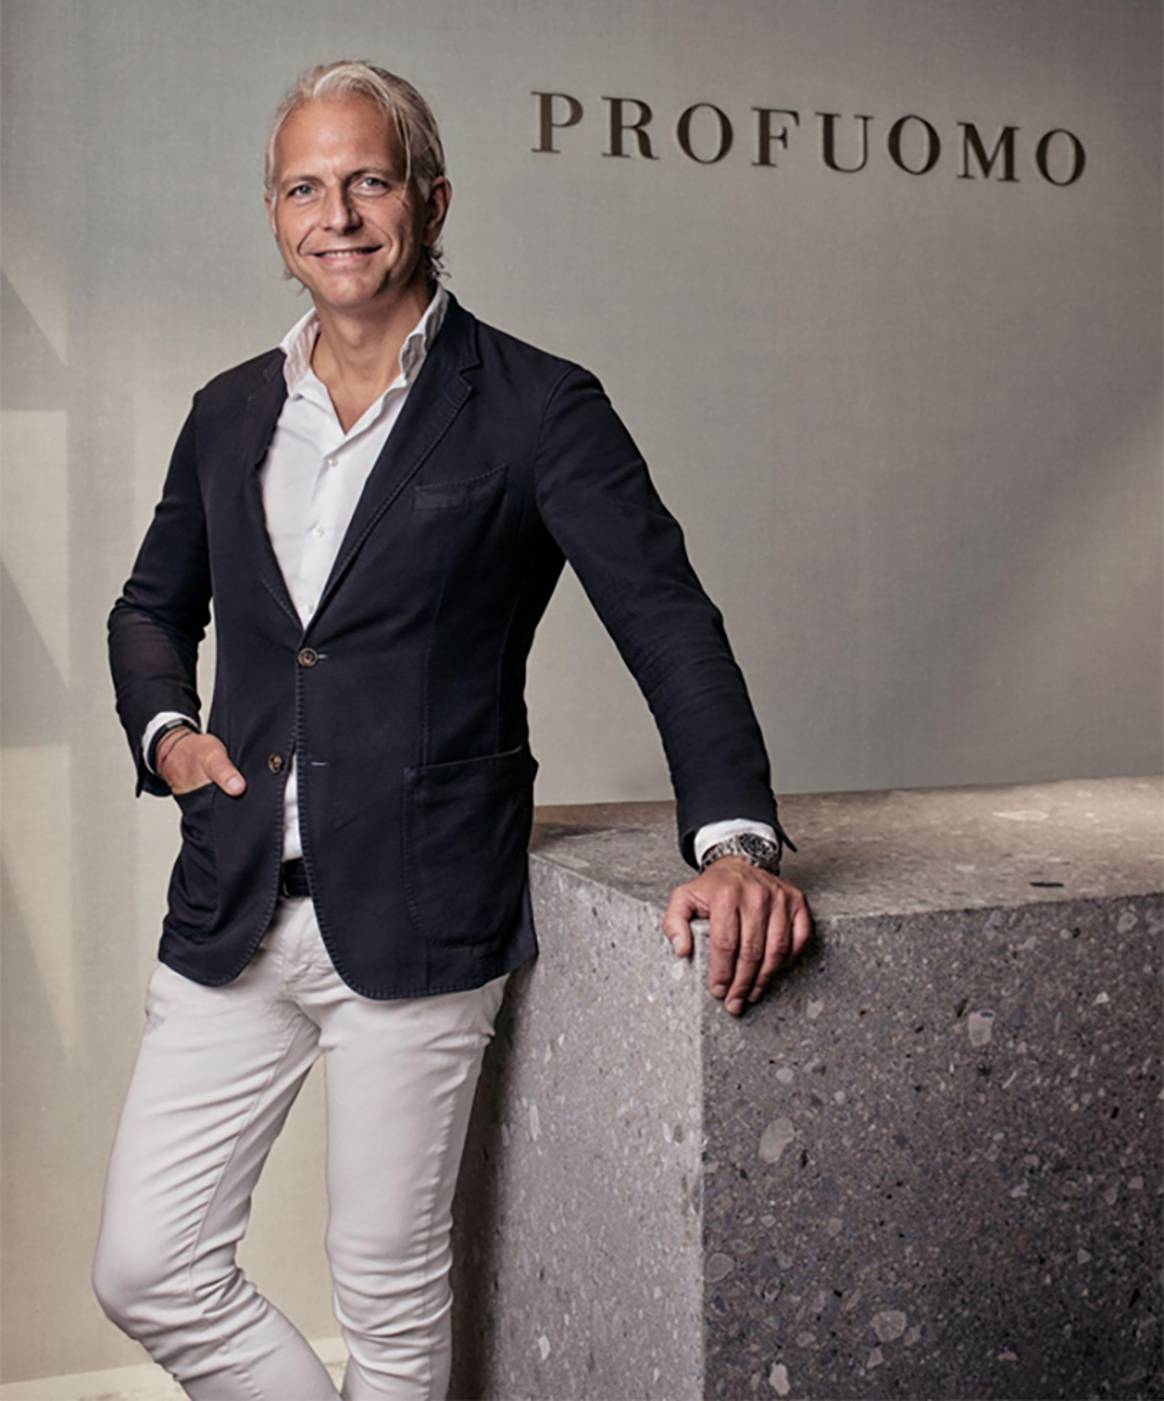 Image: Harry van der Zee, chief executive officer at Profuomo